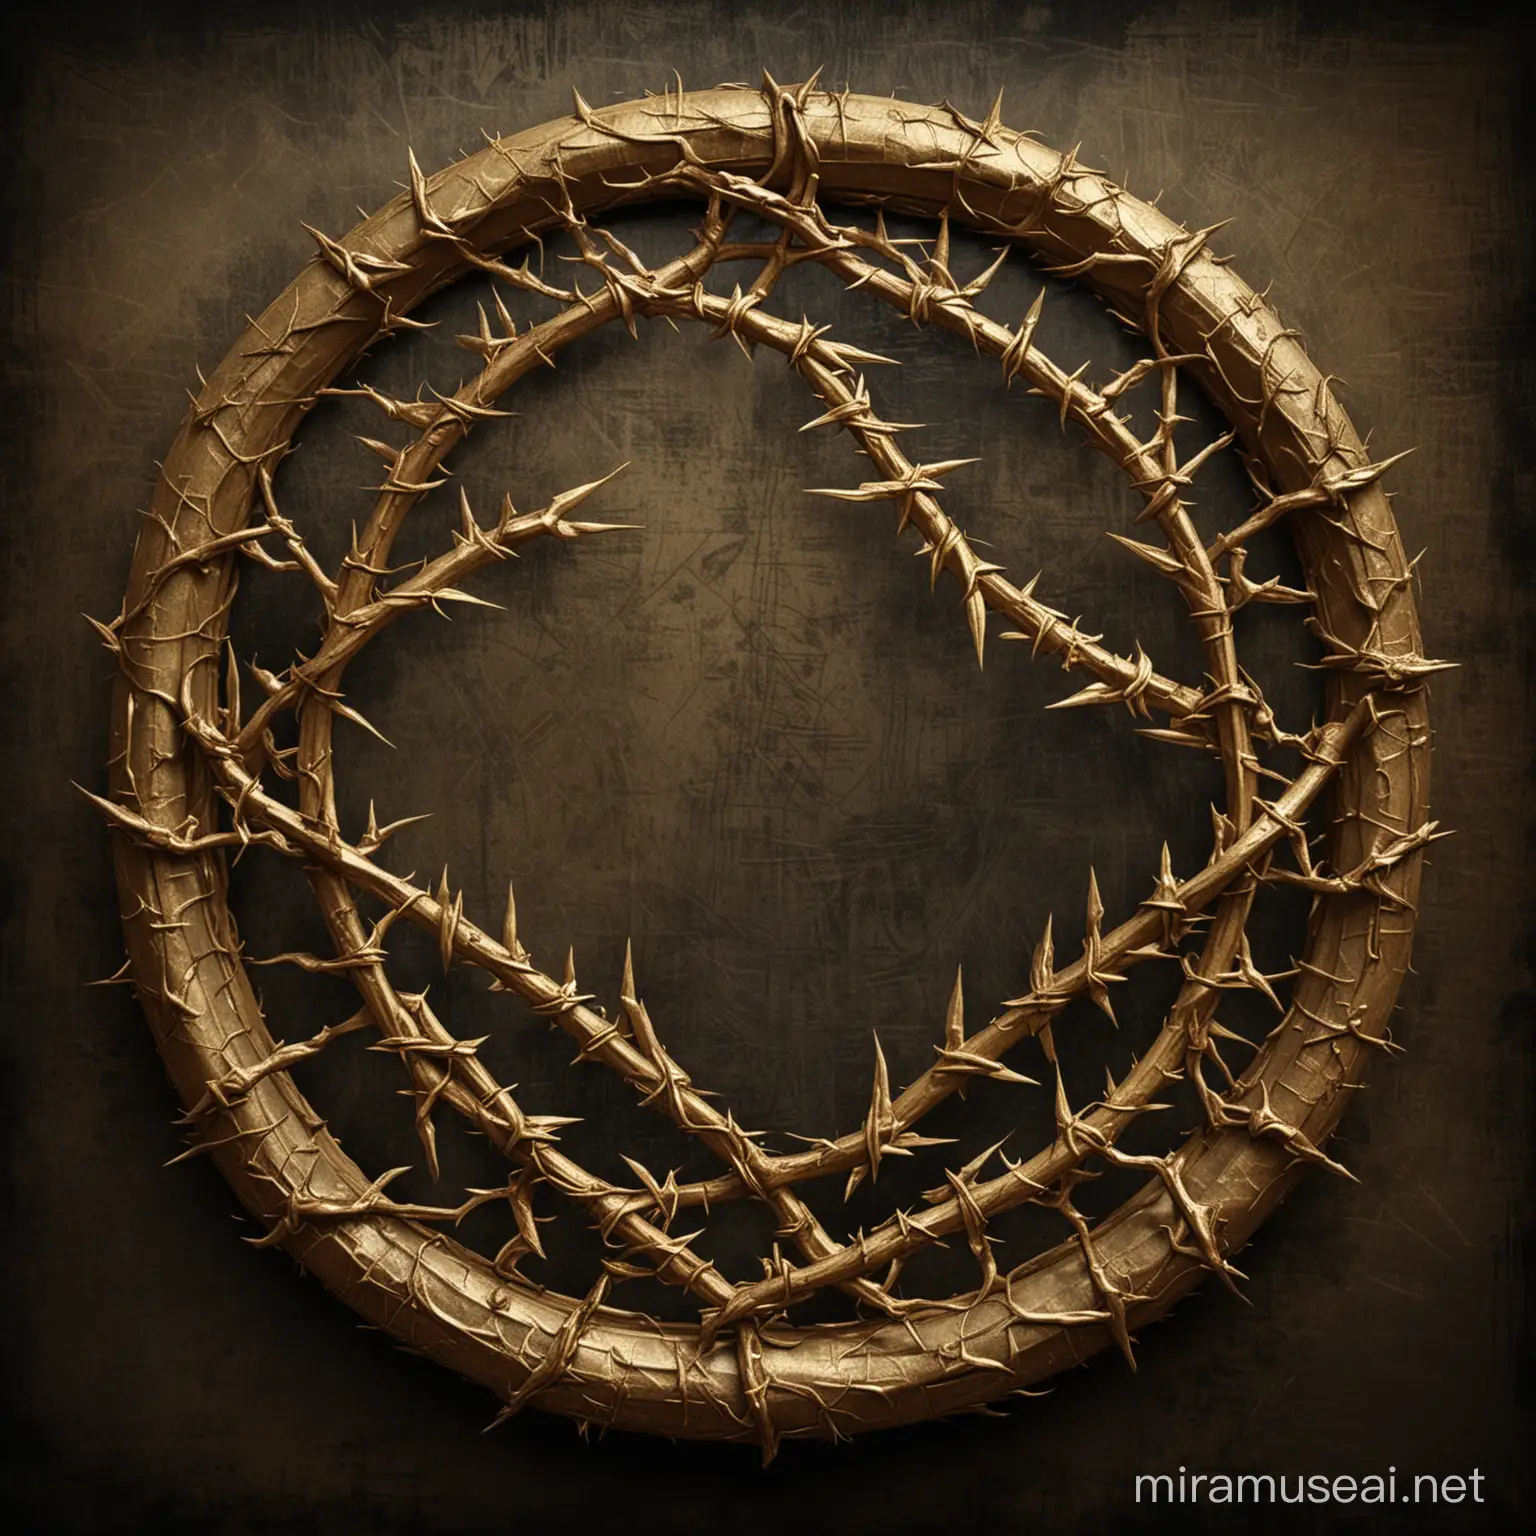 Crown of intertwined thorns,golden,perfectly round,black grunge texture,ancient scroll background,no errors